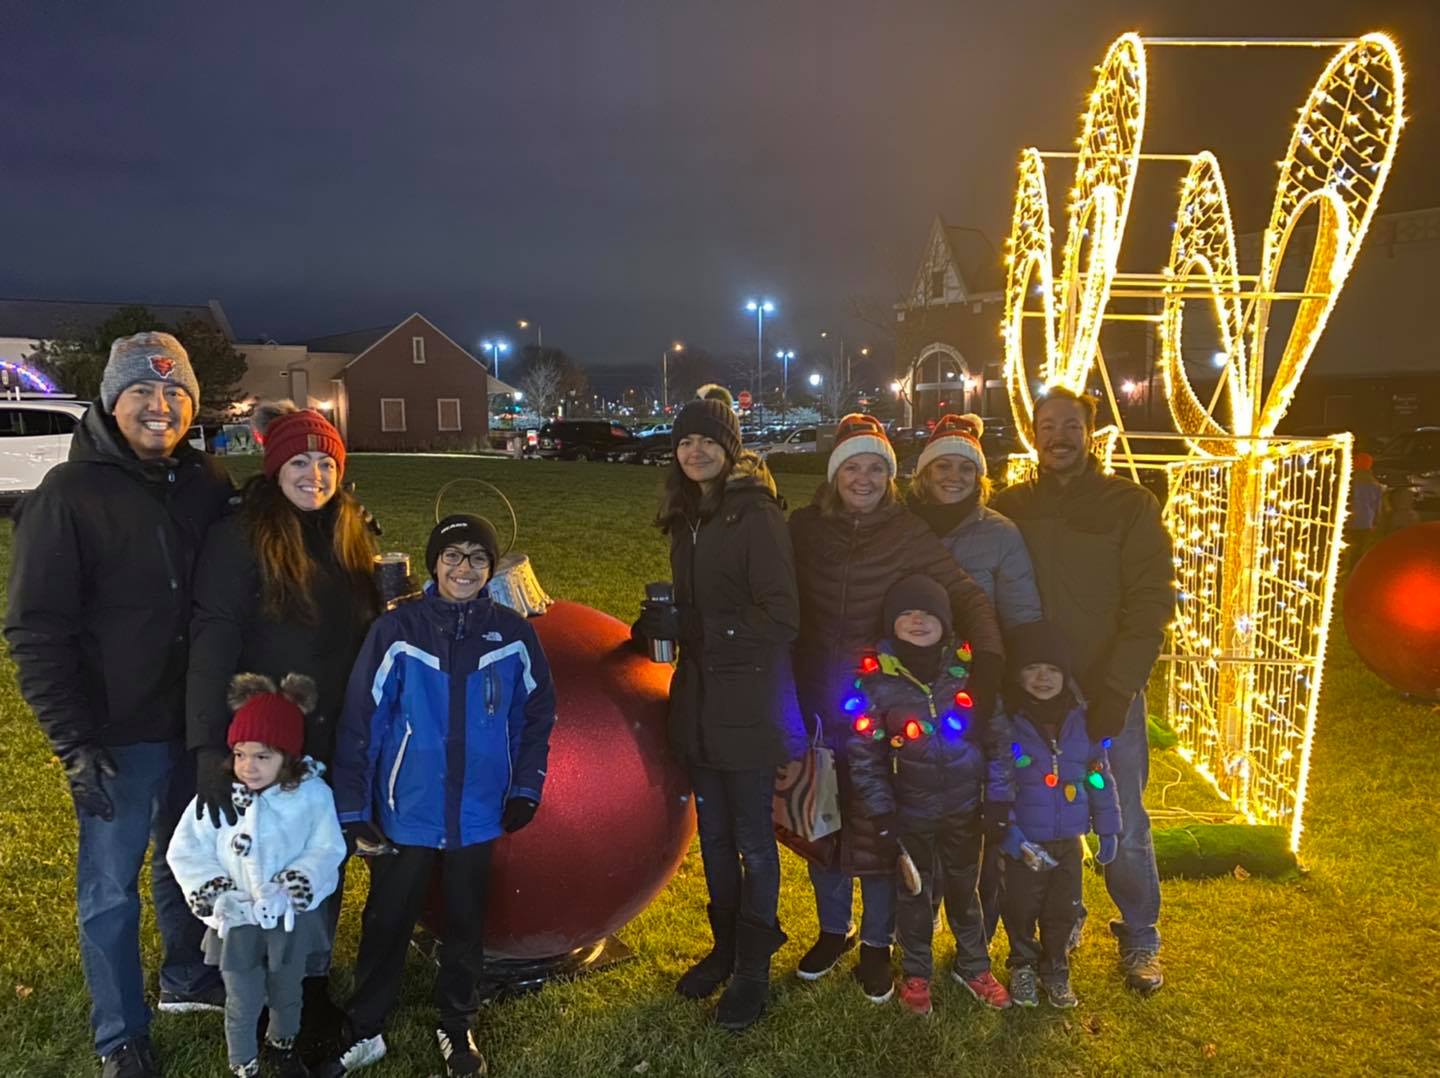 <h1 class="tribe-events-single-event-title">Annual Arboretum Tree Lighting with Joe and Tina!</h1>